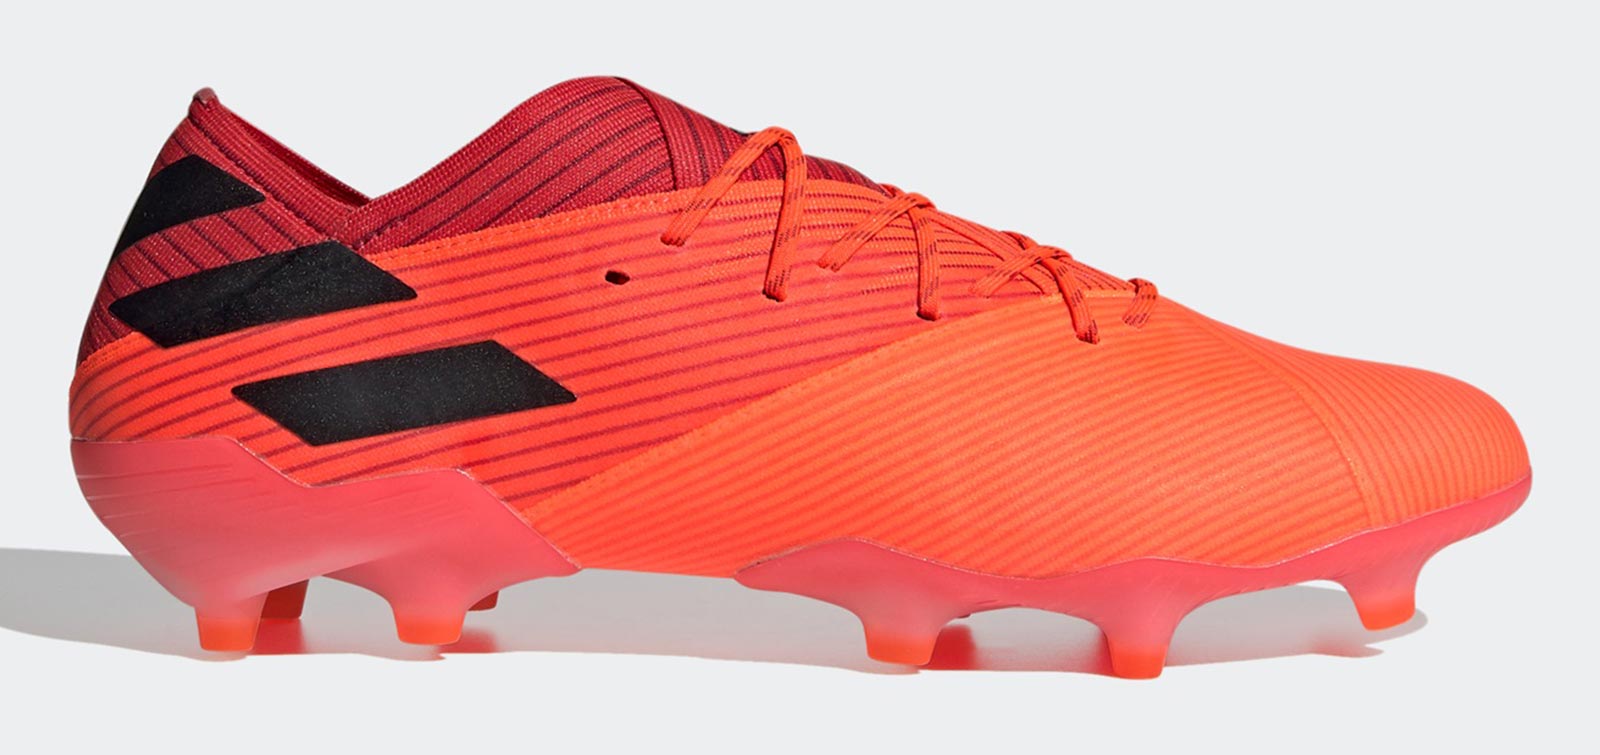 messi football shoes 2020